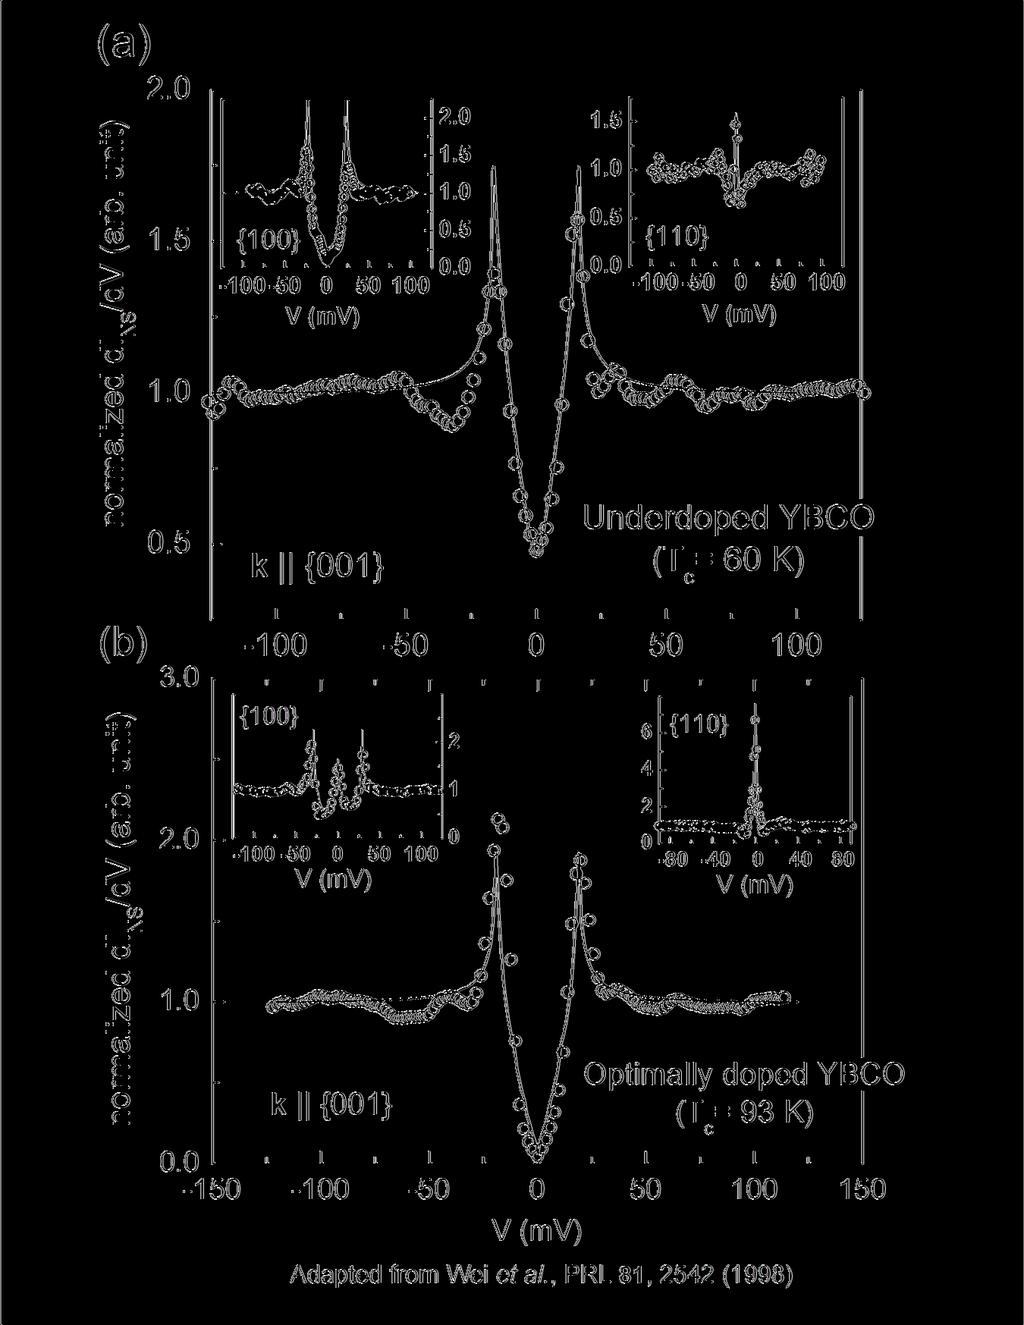 74 Figure 4.4: (a) Normalized tunneling spectra of underdoped YBCO single crystal (T c = 60.0±2.5 K) with BTK fitting curves. Main panel: c-axis tunneling spectrum.